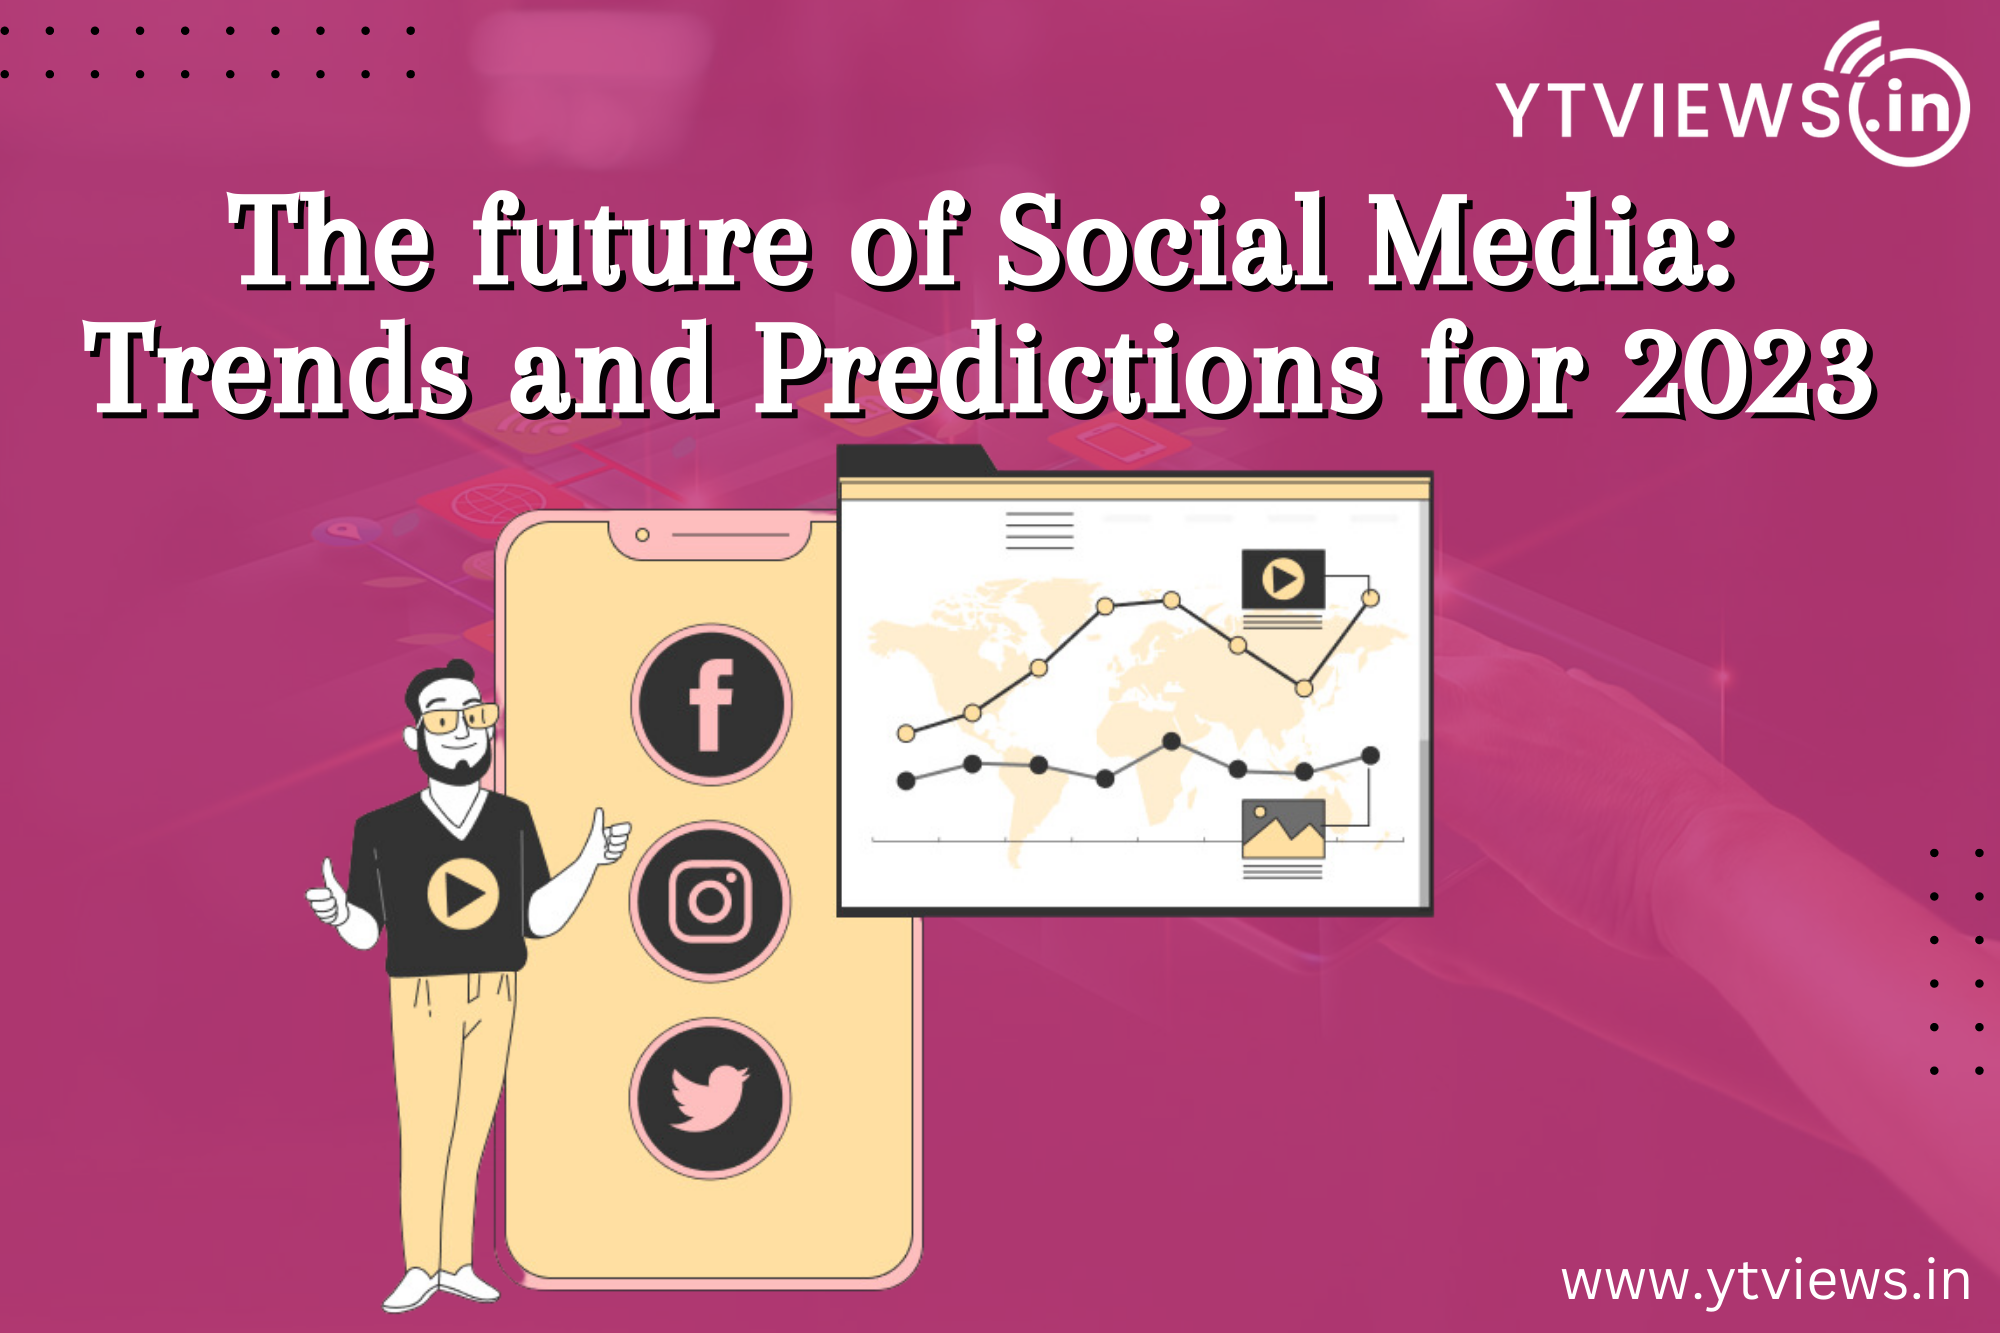 The future of social media: Trends and Predictions for 2023